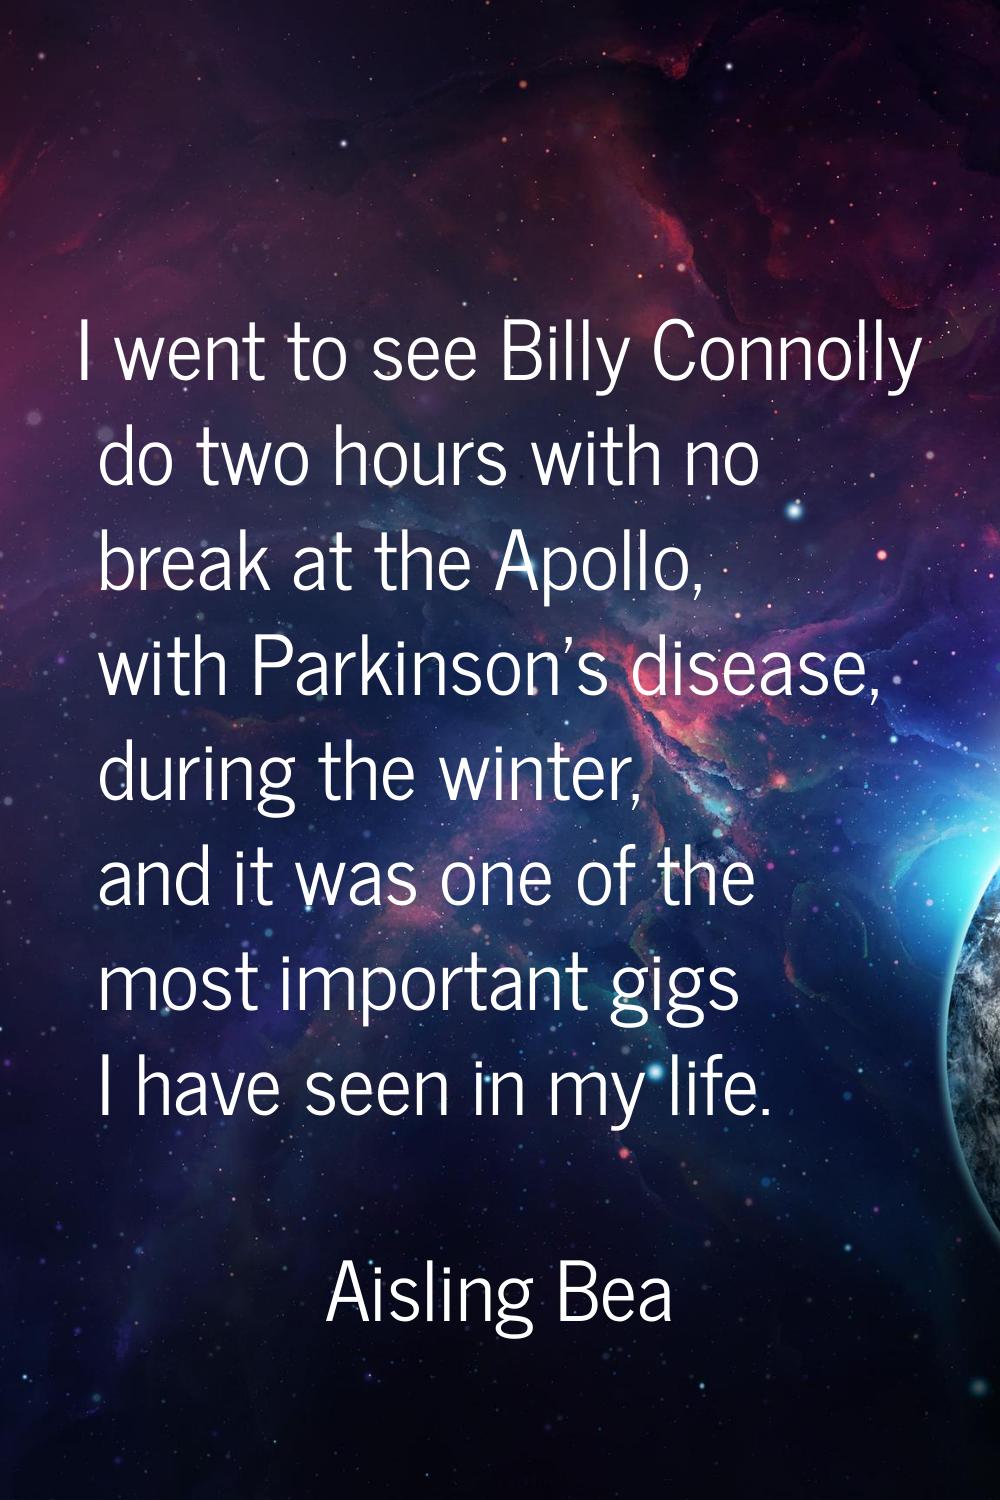 I went to see Billy Connolly do two hours with no break at the Apollo, with Parkinson's disease, du